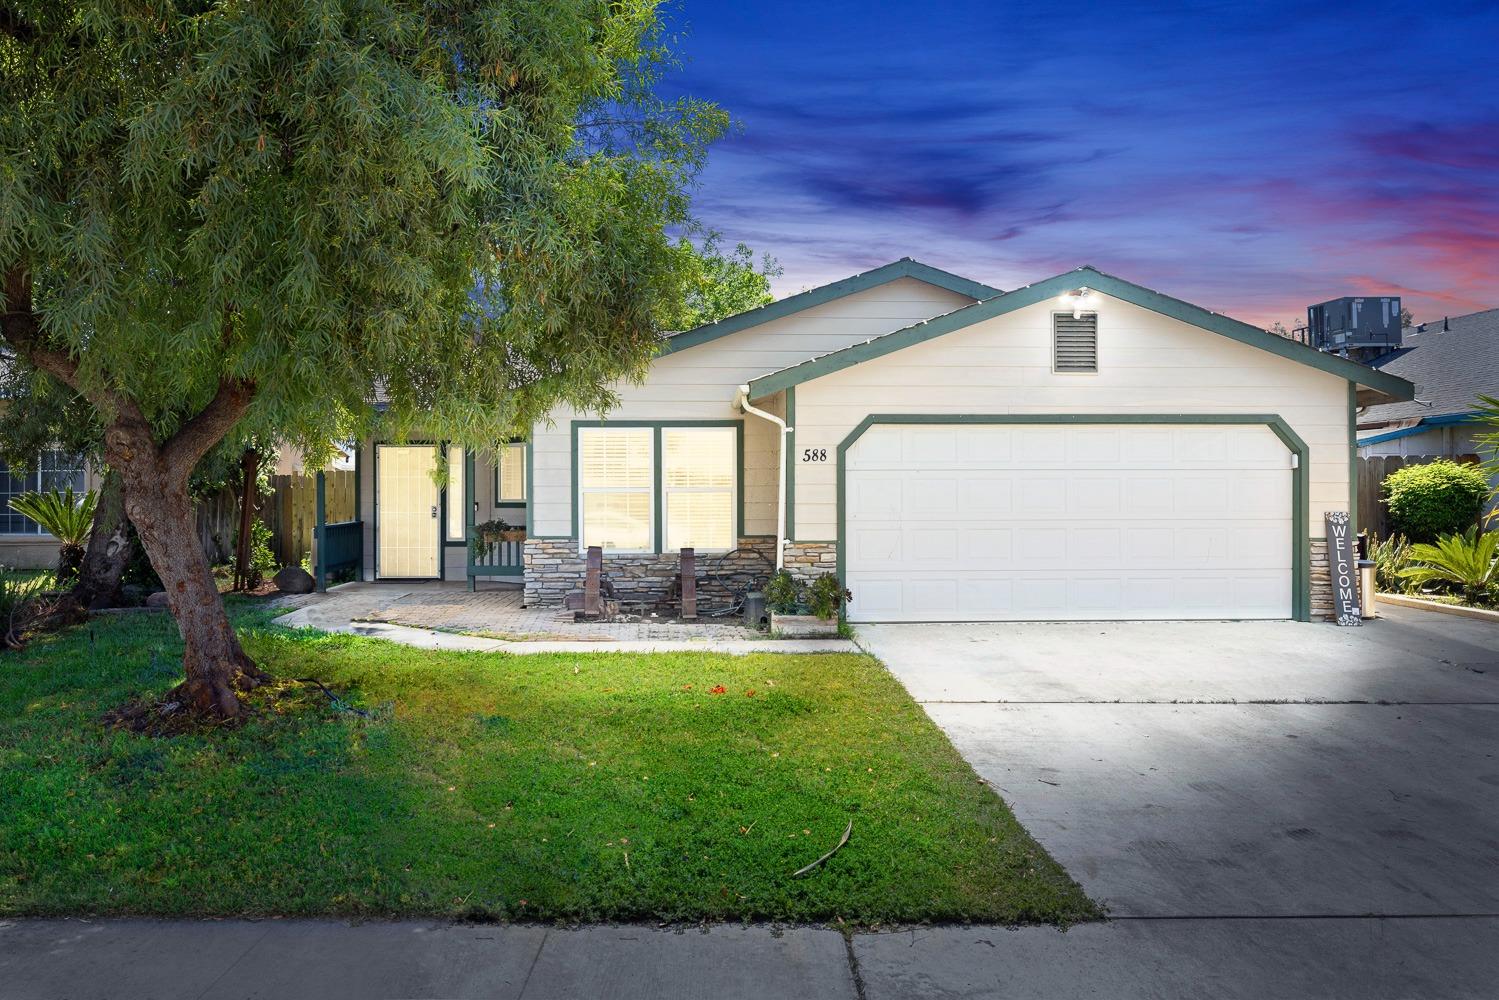 Photo of 588 S Creekside St in Porterville, CA